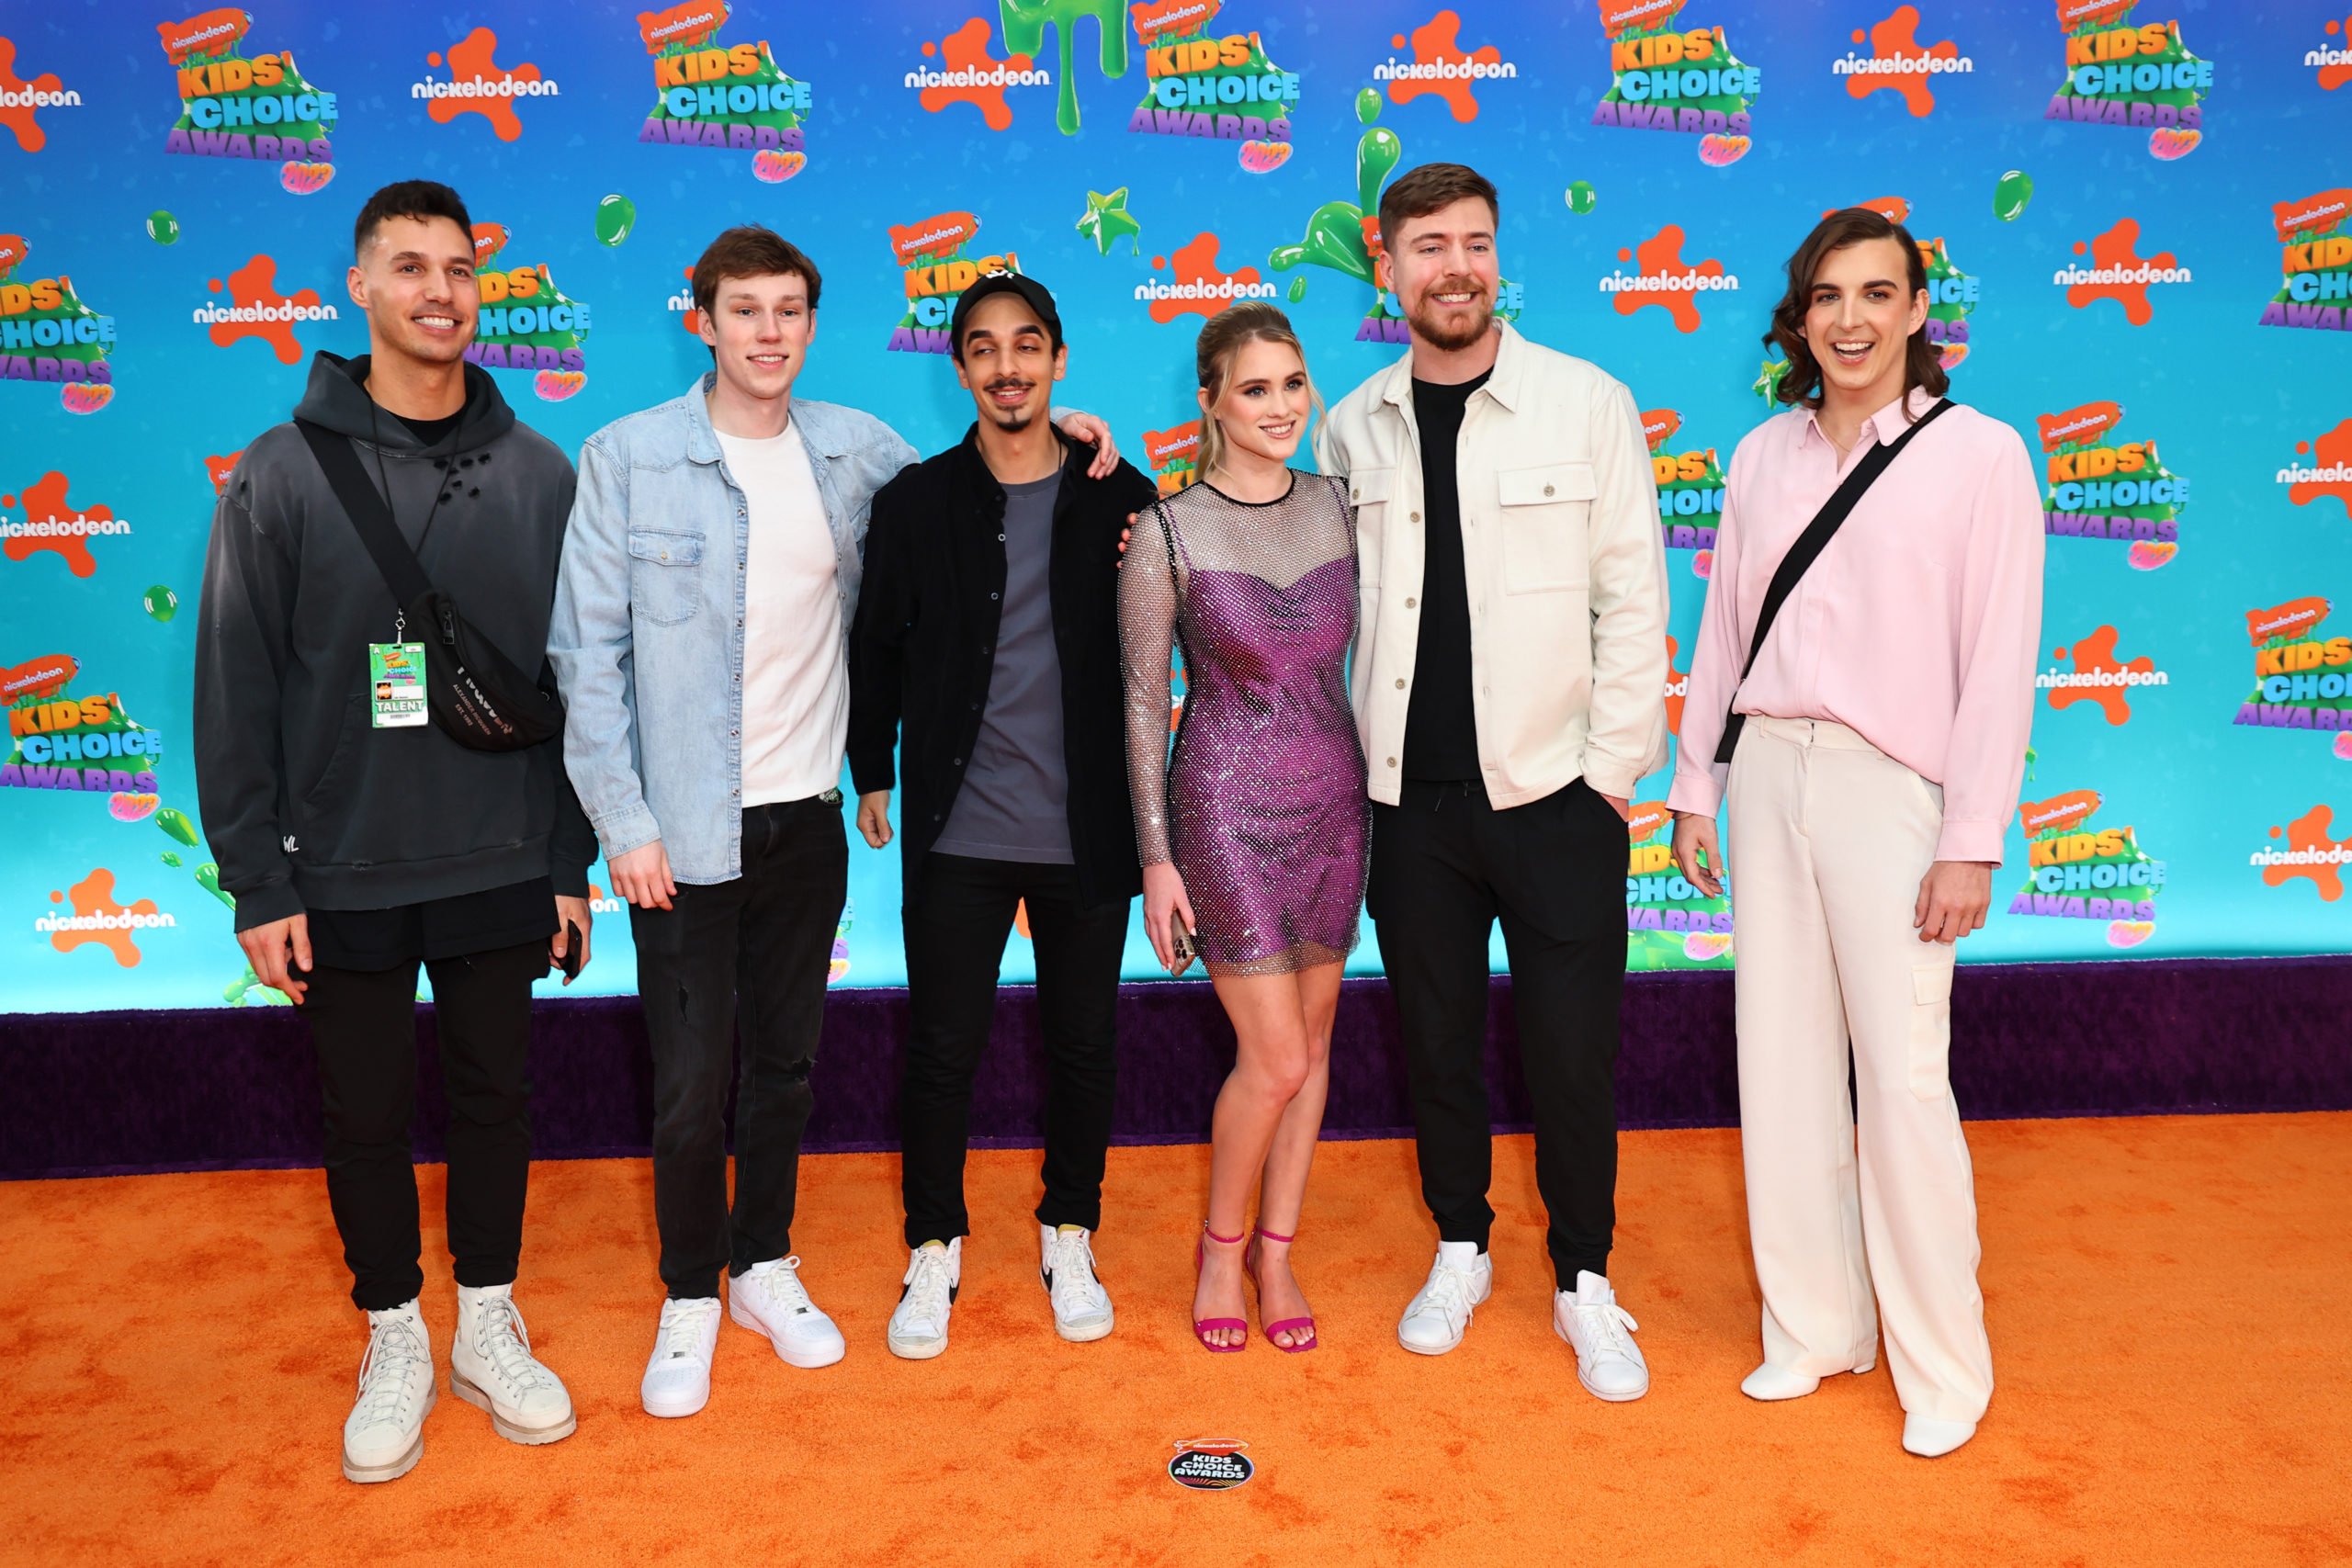 LOS ANGELES, CALIFORNIA - MARCH 04: MrBeast (2nd from R) attends the 2023 Nickelodeon Kids' Choice Awards at Microsoft Theater on March 04, 2023 in Los Angeles, California. (Photo by Leon Bennett/Getty Images)